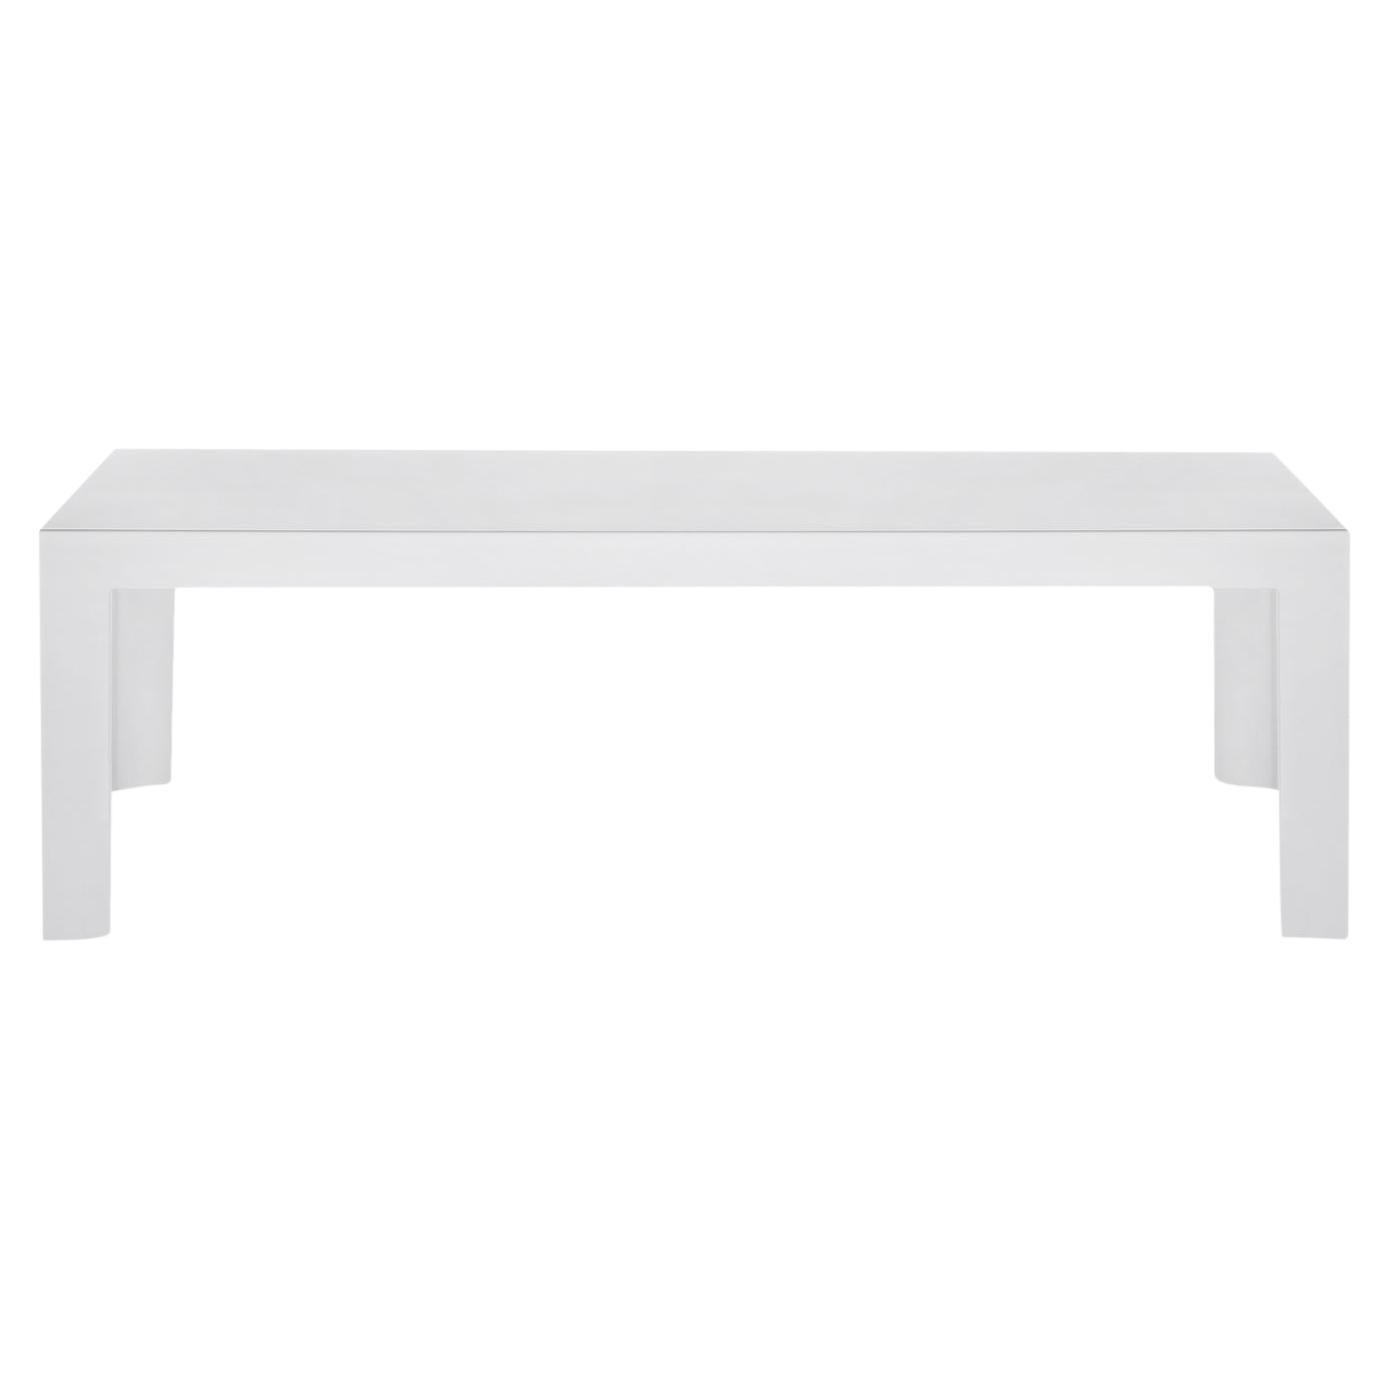 Kartell Invisible Side Table in Glossy White by Tokujin Yoshioka